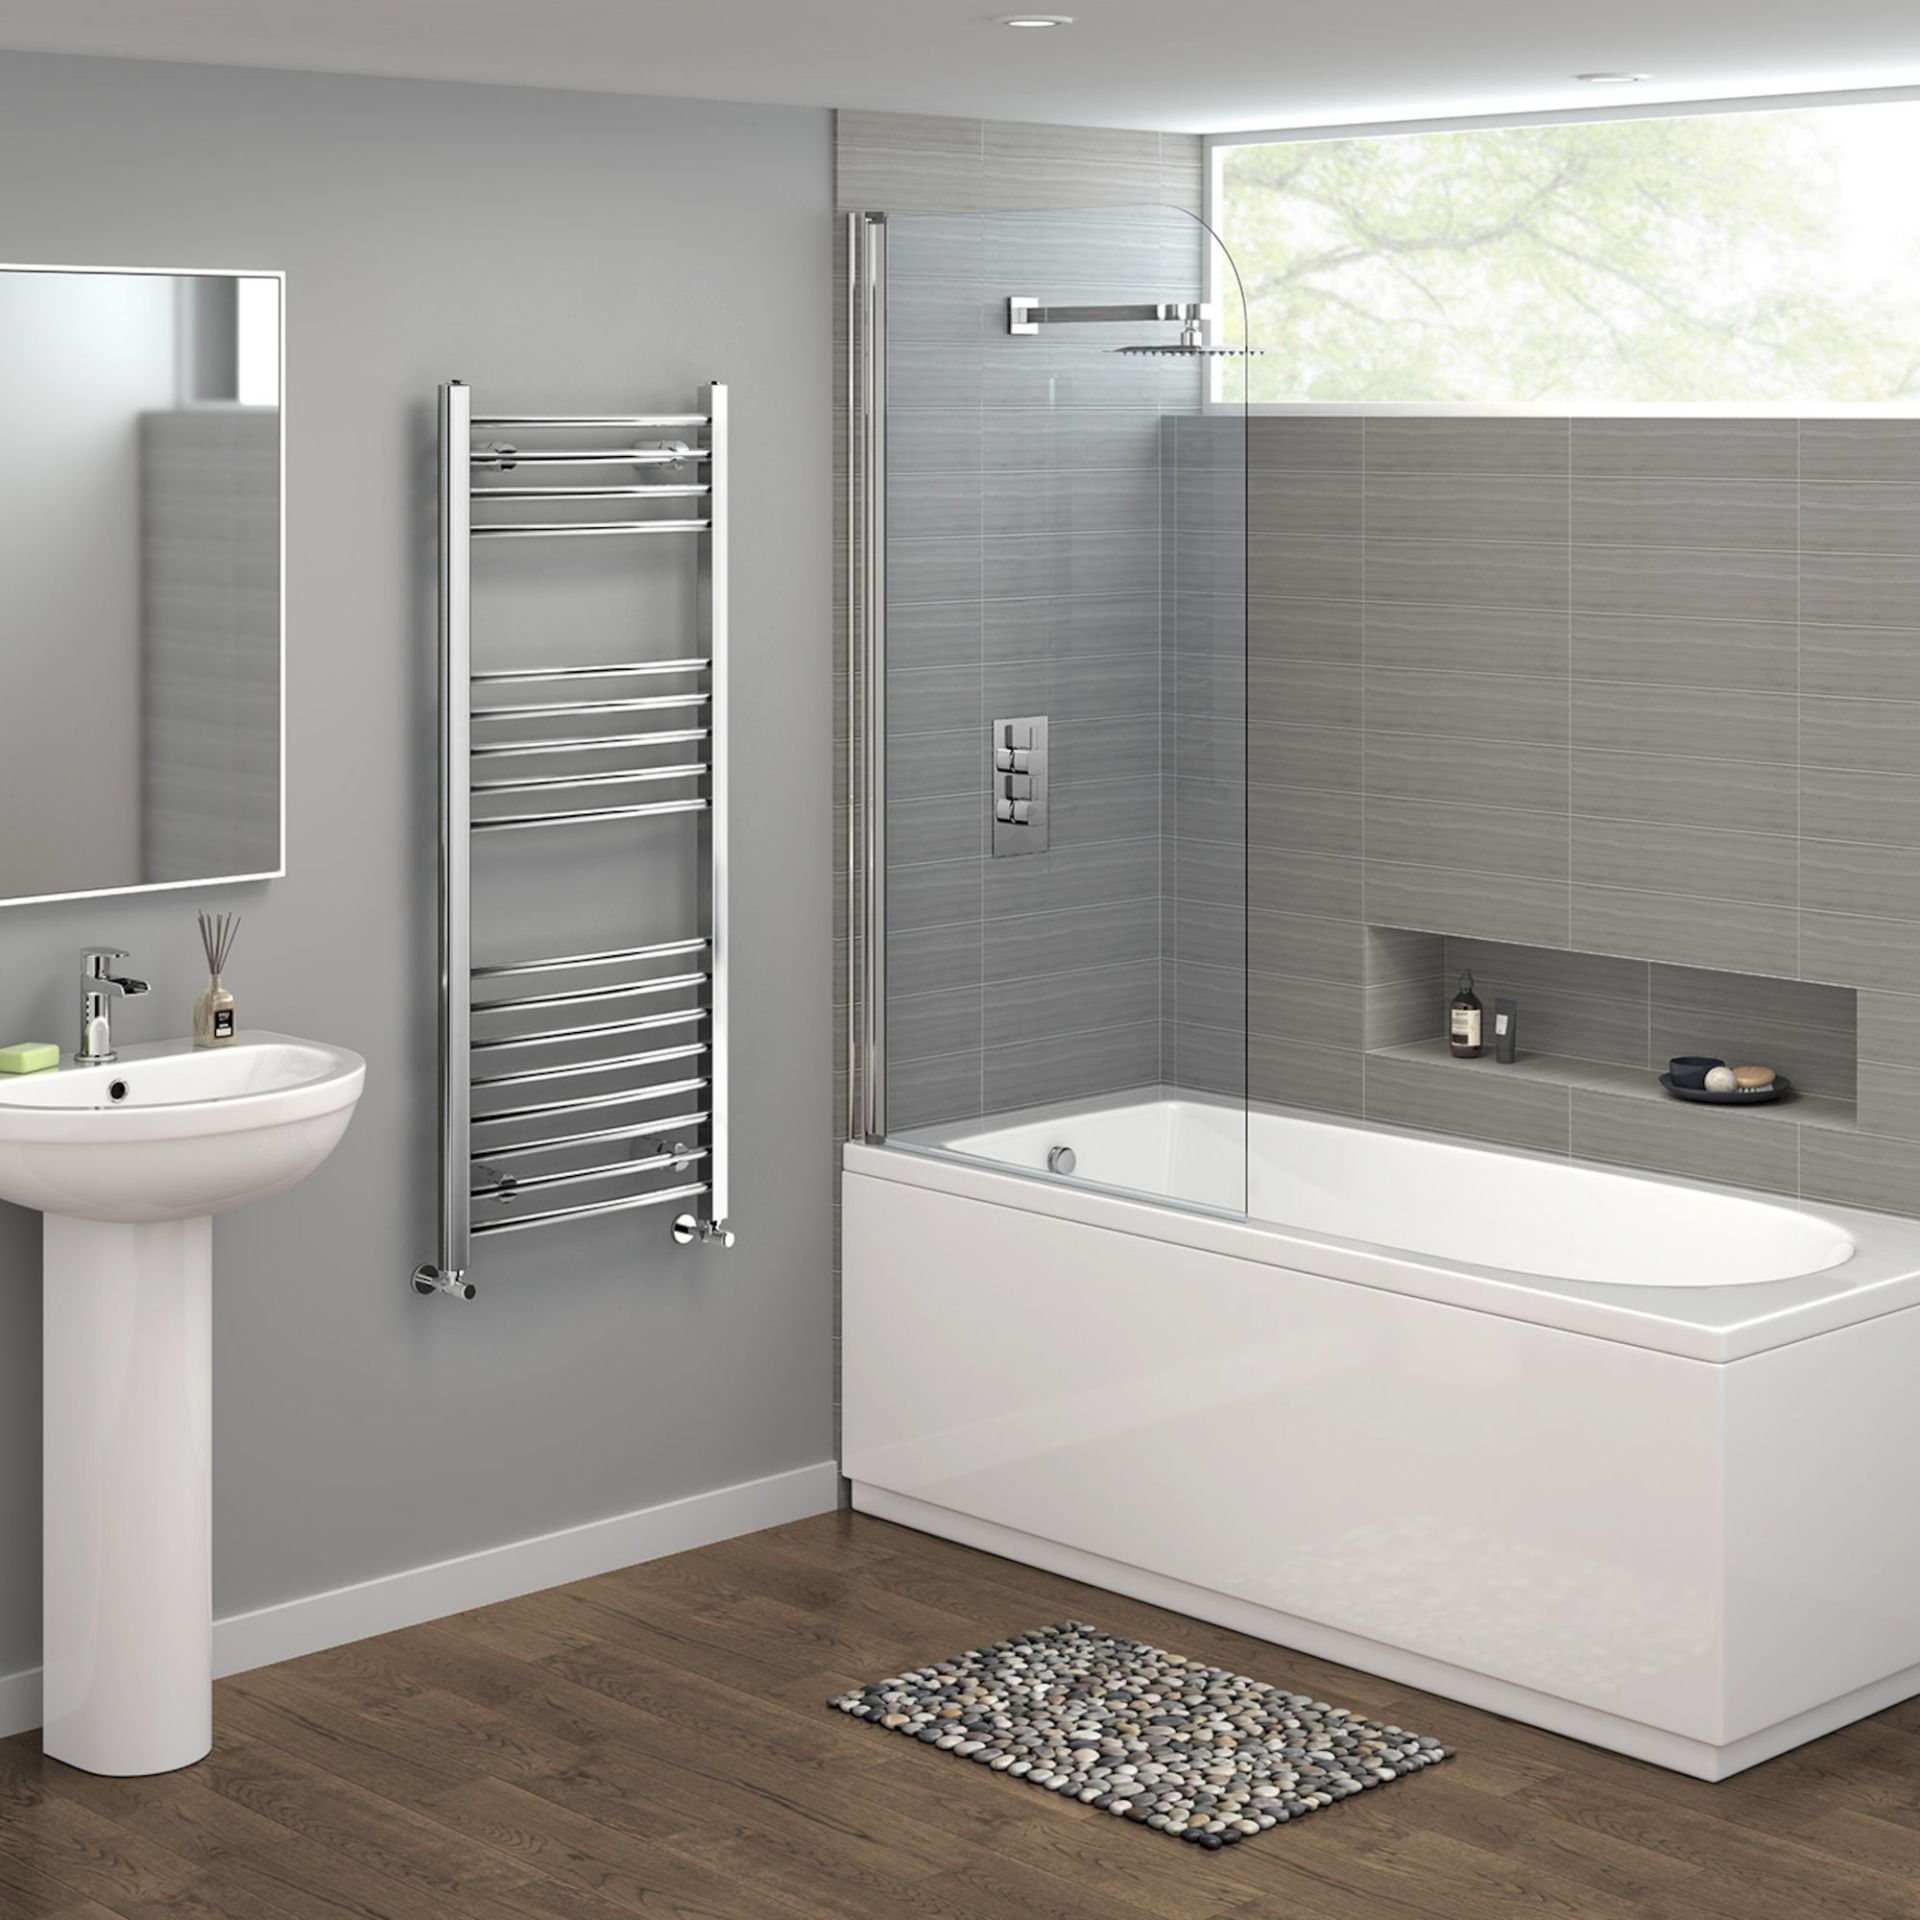 (EY121) 1200x500mm - 20mm Tubes - Chrome Curved Rail Ladder Towel Radiator. Made from chrome - Image 2 of 3